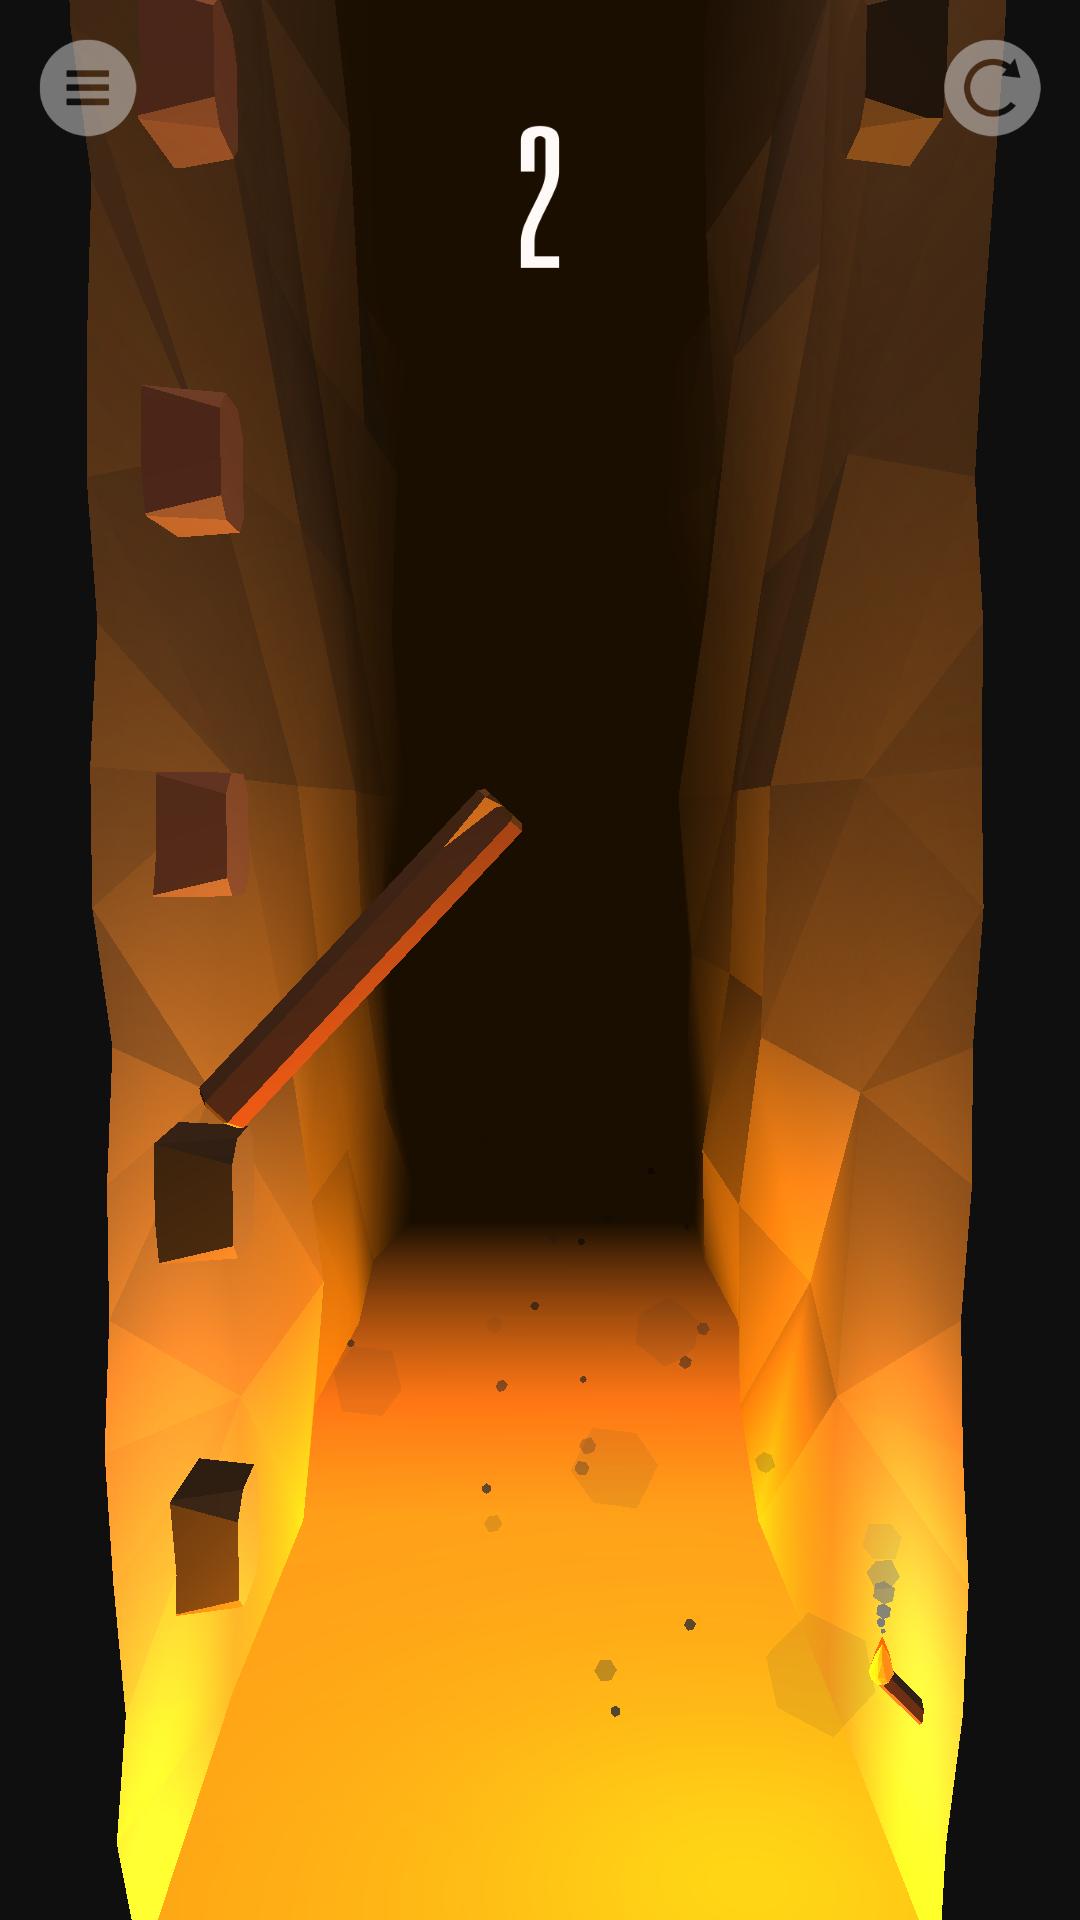 A difficult game about climbing читы. Log down.